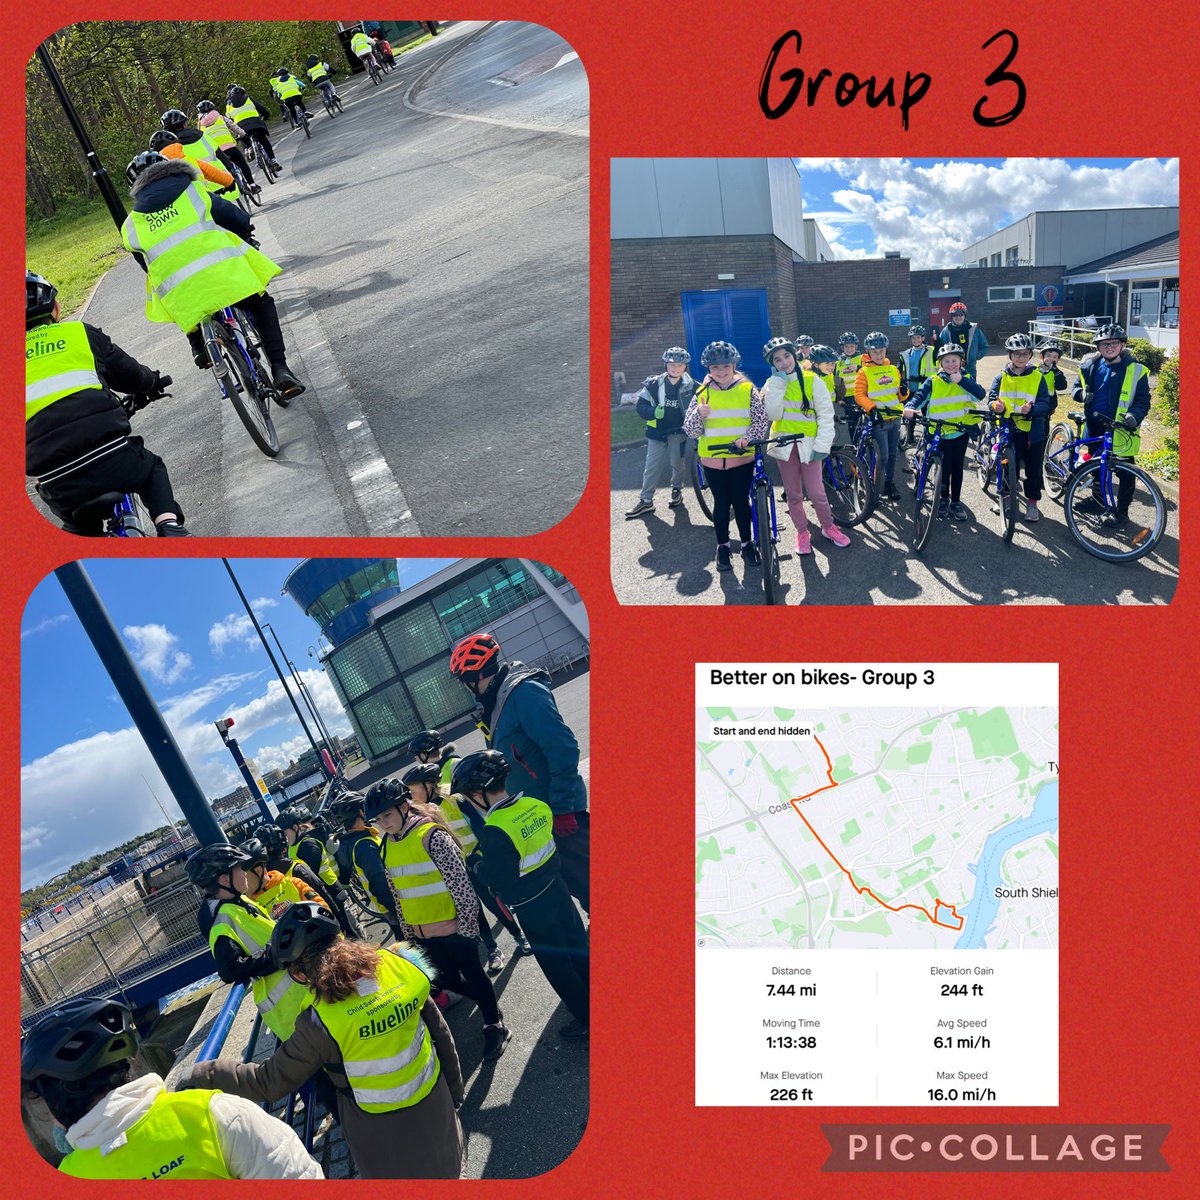 @NYPSYr5Meerkats @NypsYr5bPumas Luckily enough to have the sun shining for us today, as group 3 ventured out to the Royal Quays, we’d forgotten about that slight incline all the way home! #BetterOnBikes